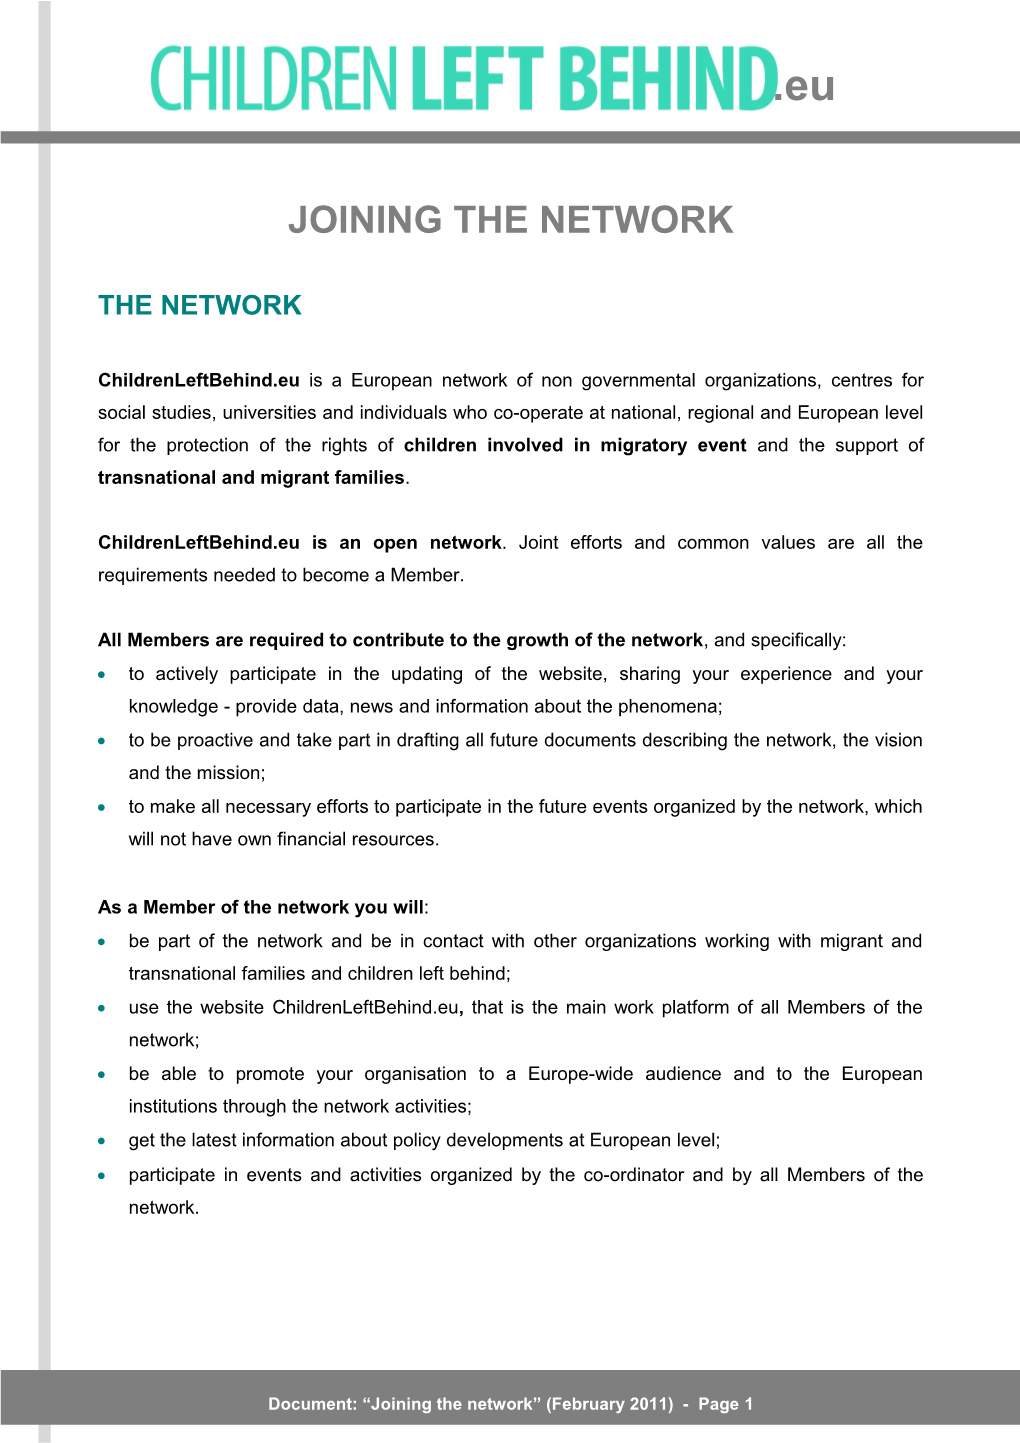 Joining the Network